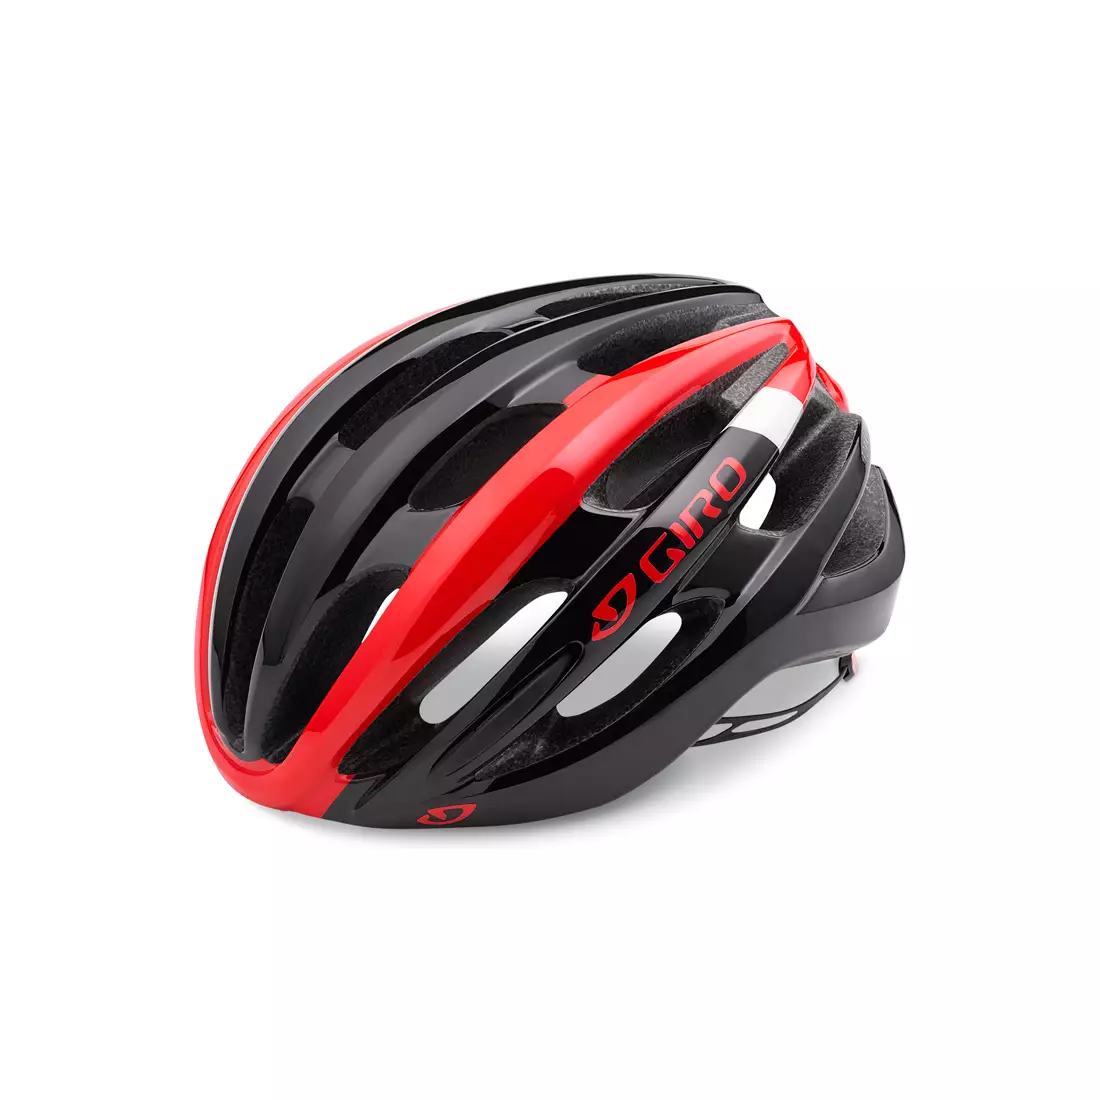 GIRO FORAY - black and red bicycle helmet